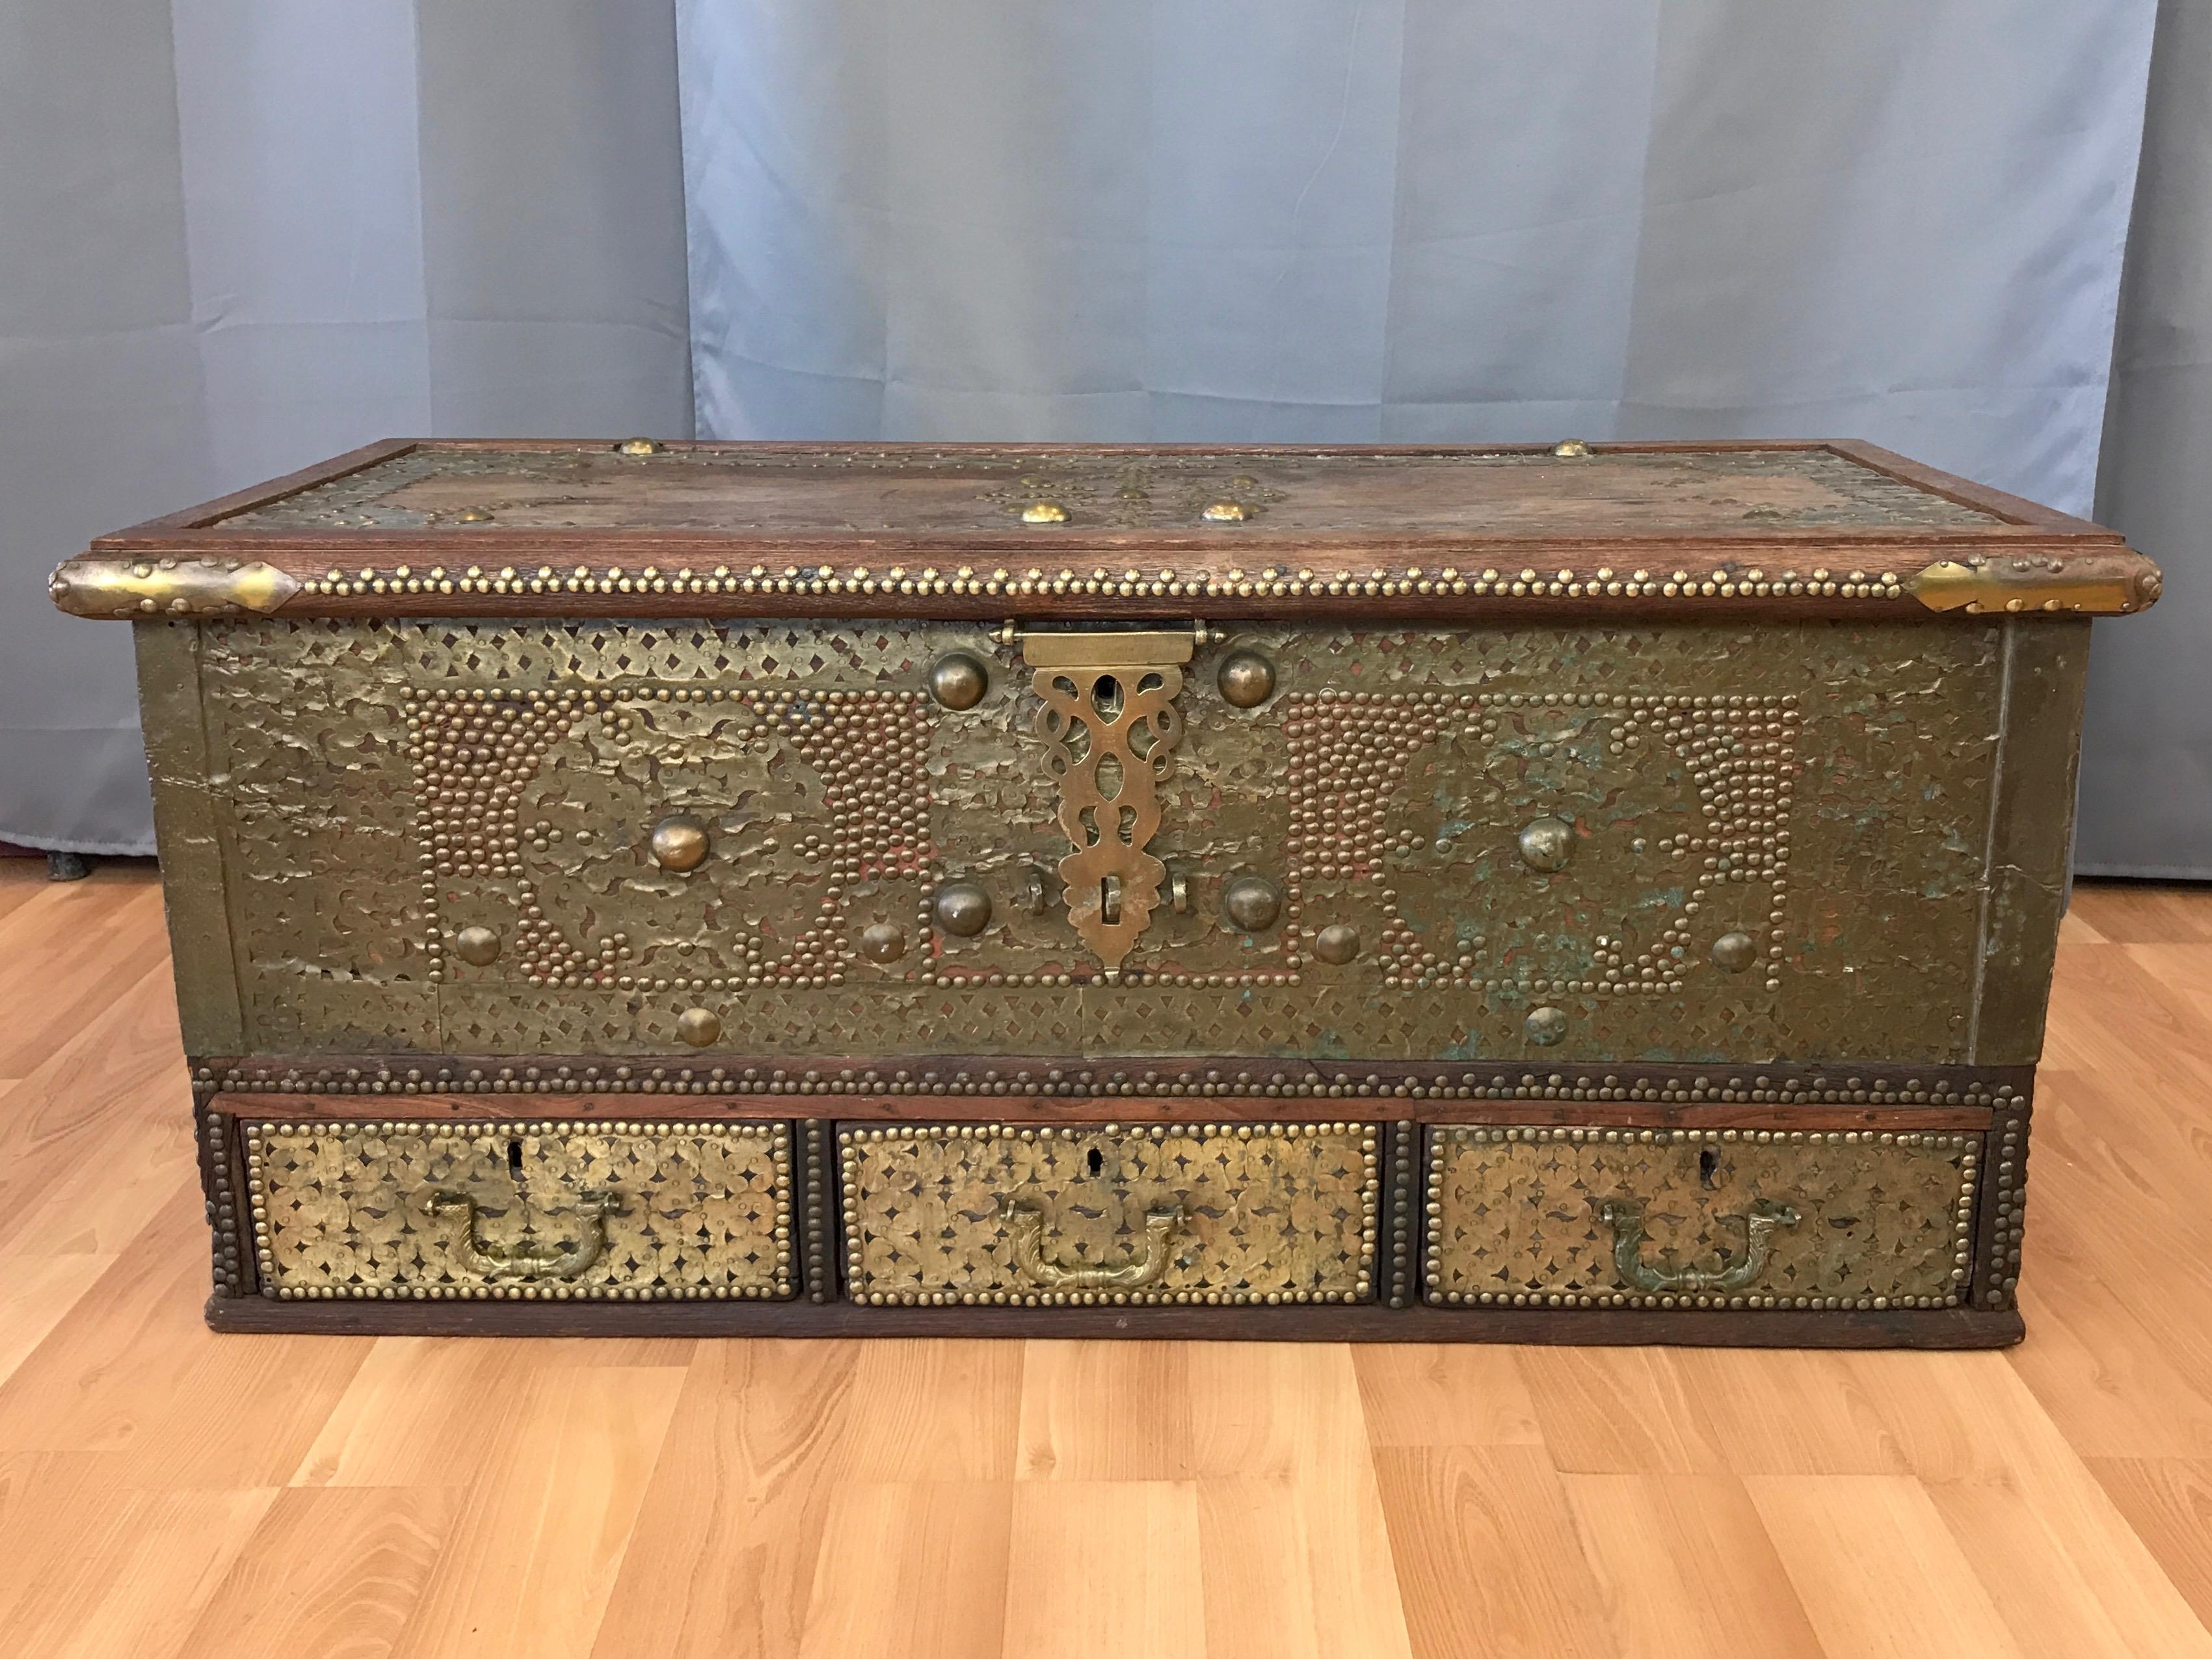 An enchanting Middle Eastern antique wood chest with drawers that features wonderfully executed brass cladding, embellishments, and hardware.

Likely of Syrian or Kuwaiti origin, this type of chest was made and used by sailors who traded along the